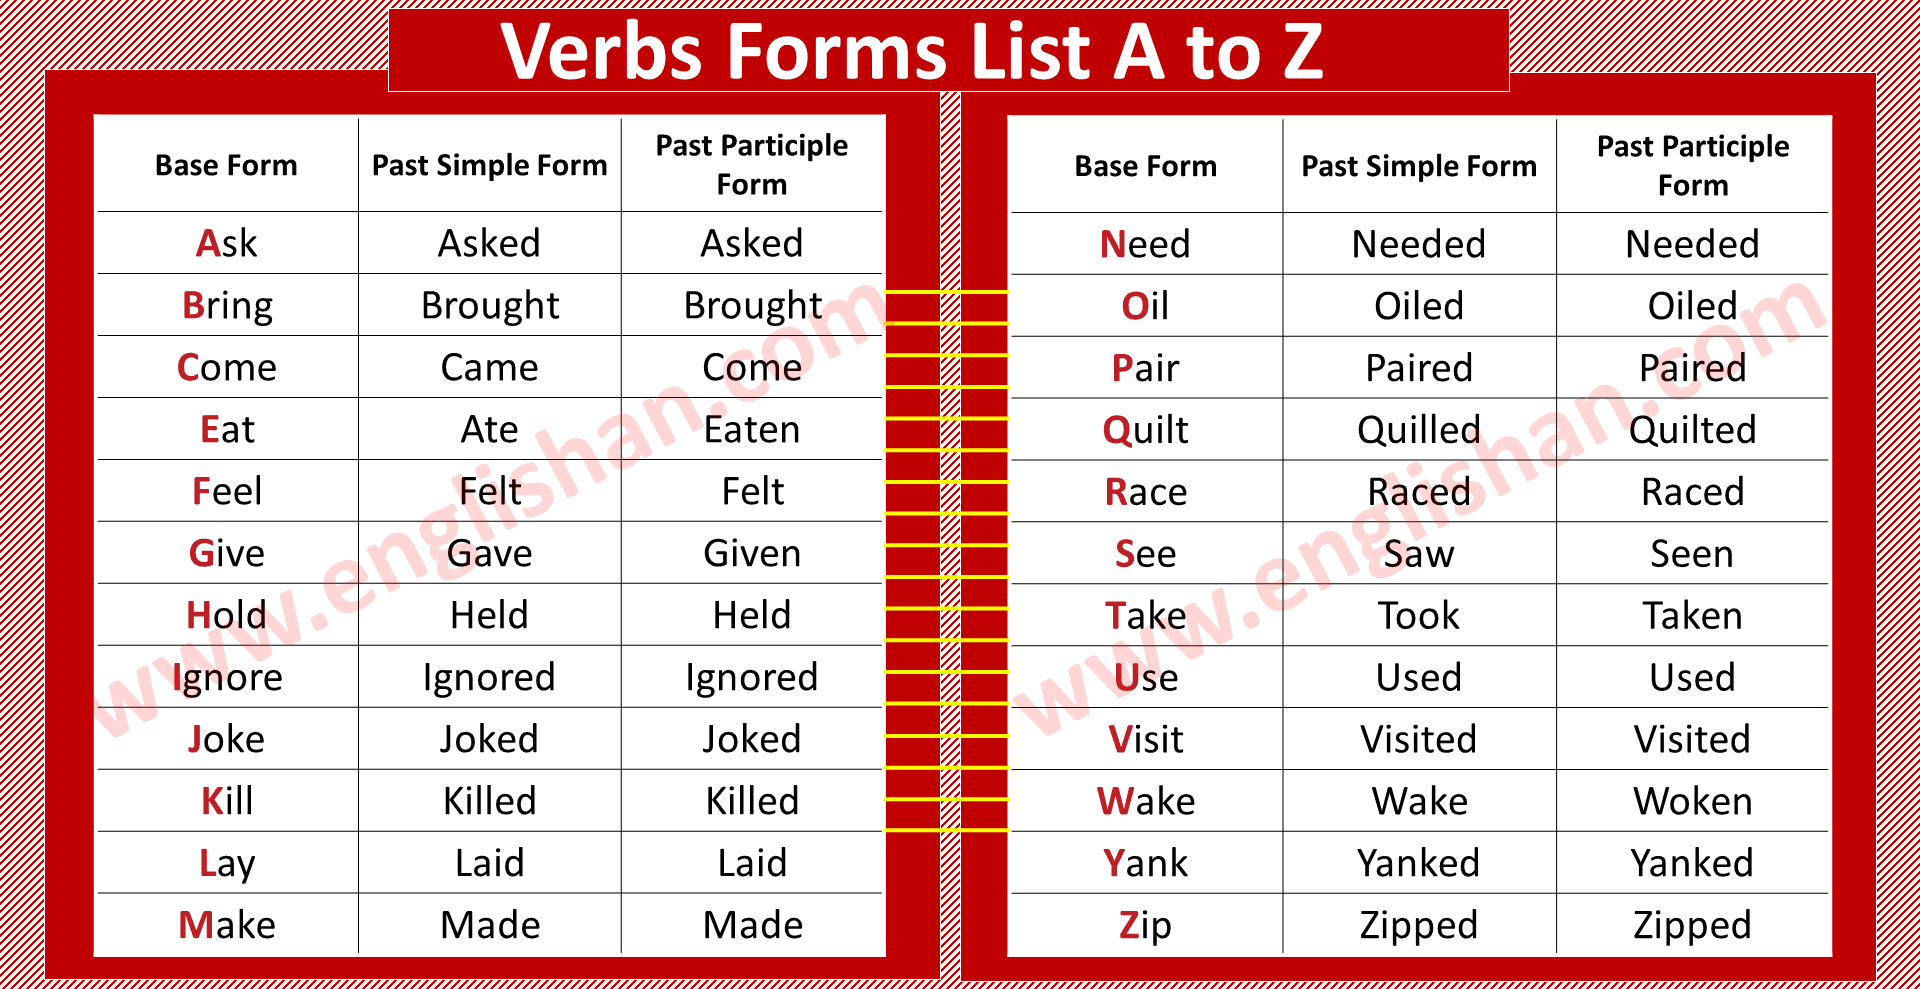 500-common-verbs-forms-list-a-to-z-with-printable-pdf-englishan